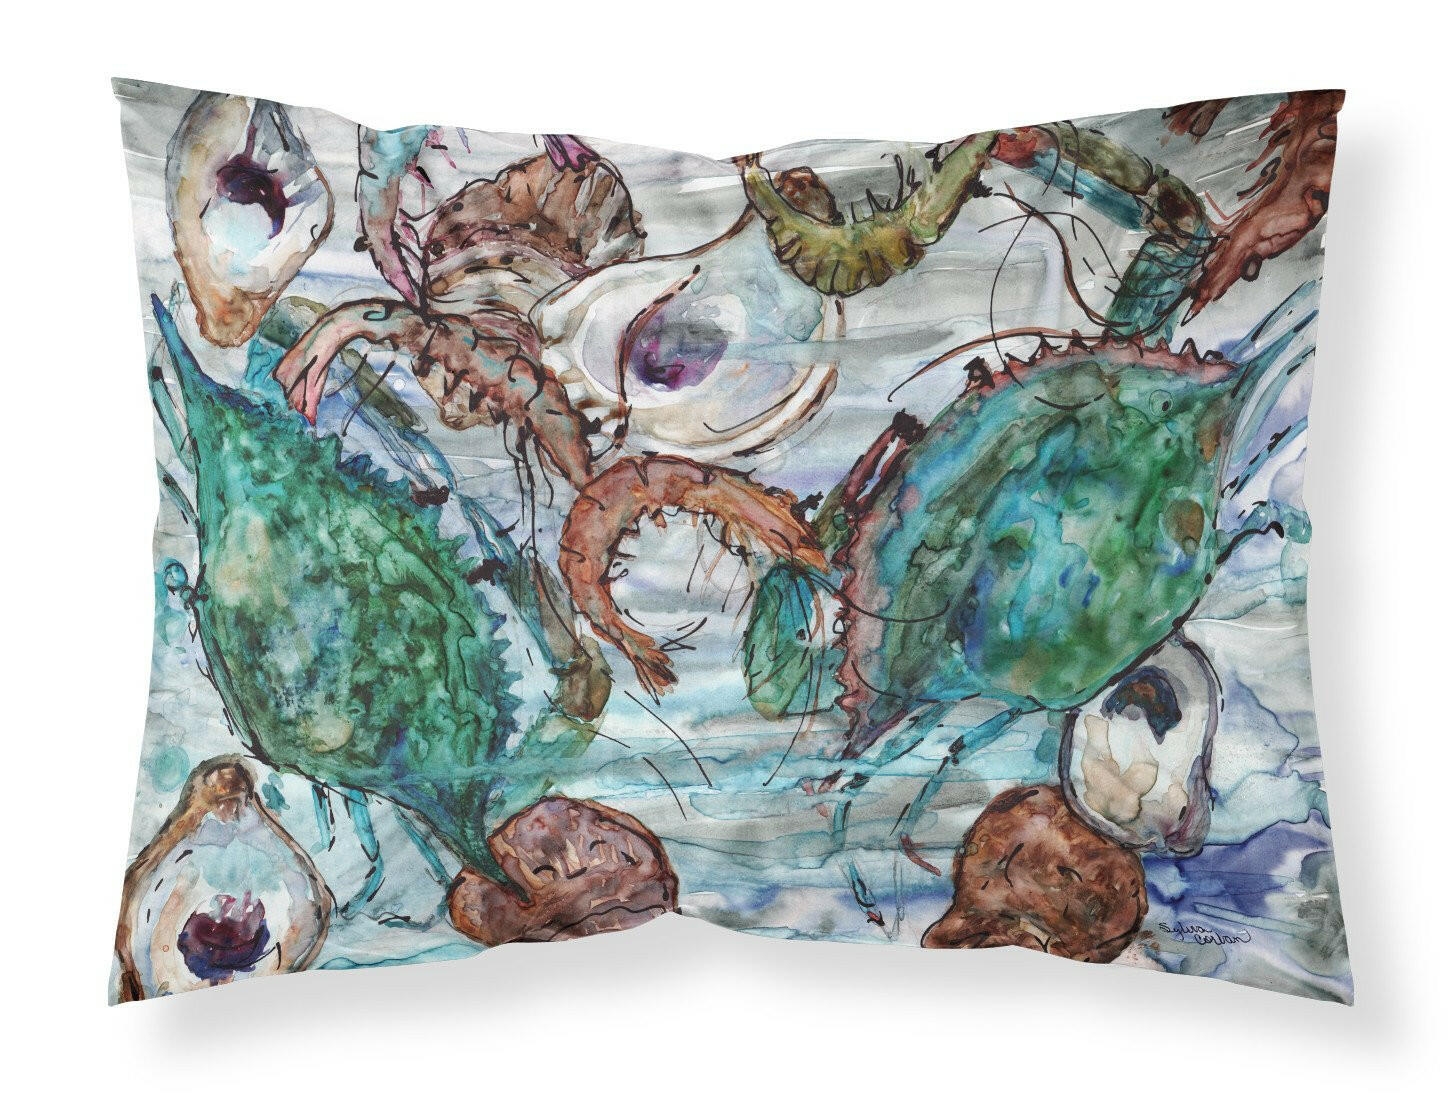 Shrimp, Crabs and Oysters in water Fabric Standard Pillowcase 8965PILLOWCASE by Caroline's Treasures